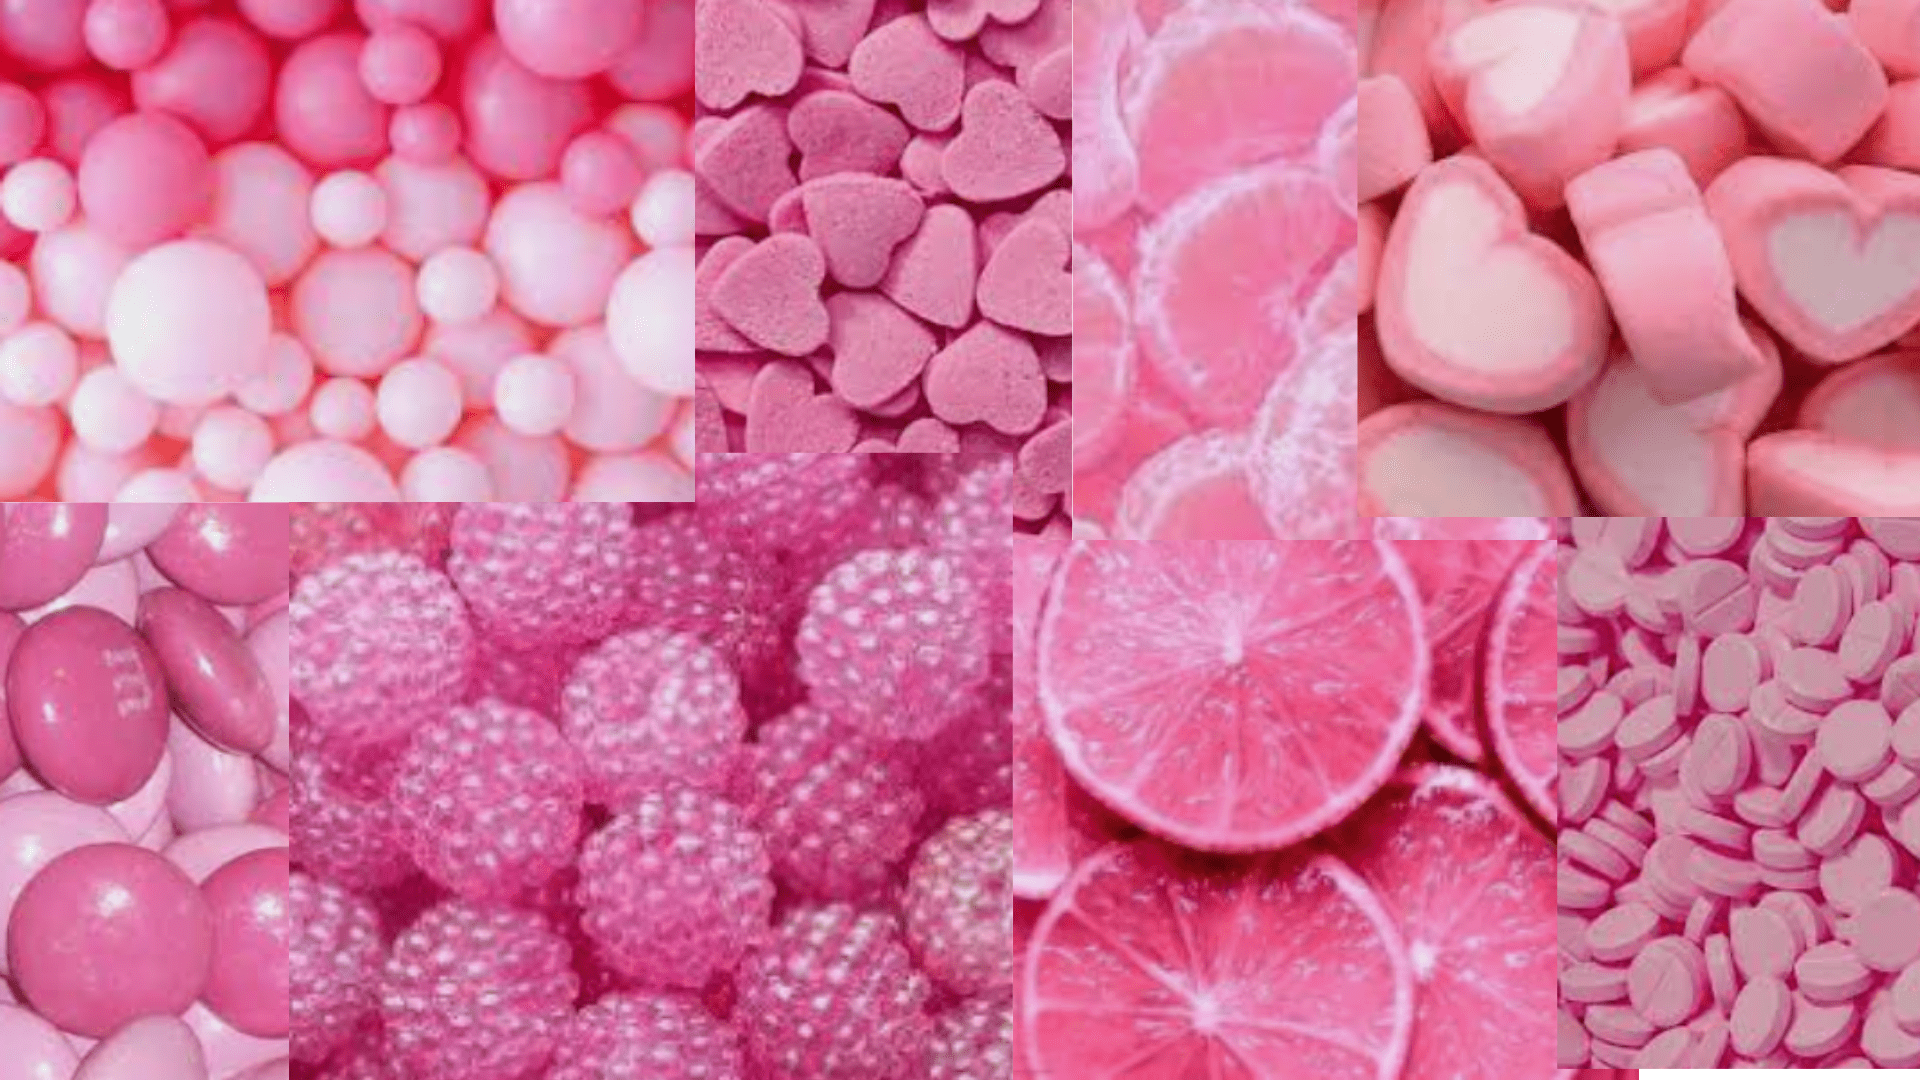 A collage of pink candy and other items - Fruit